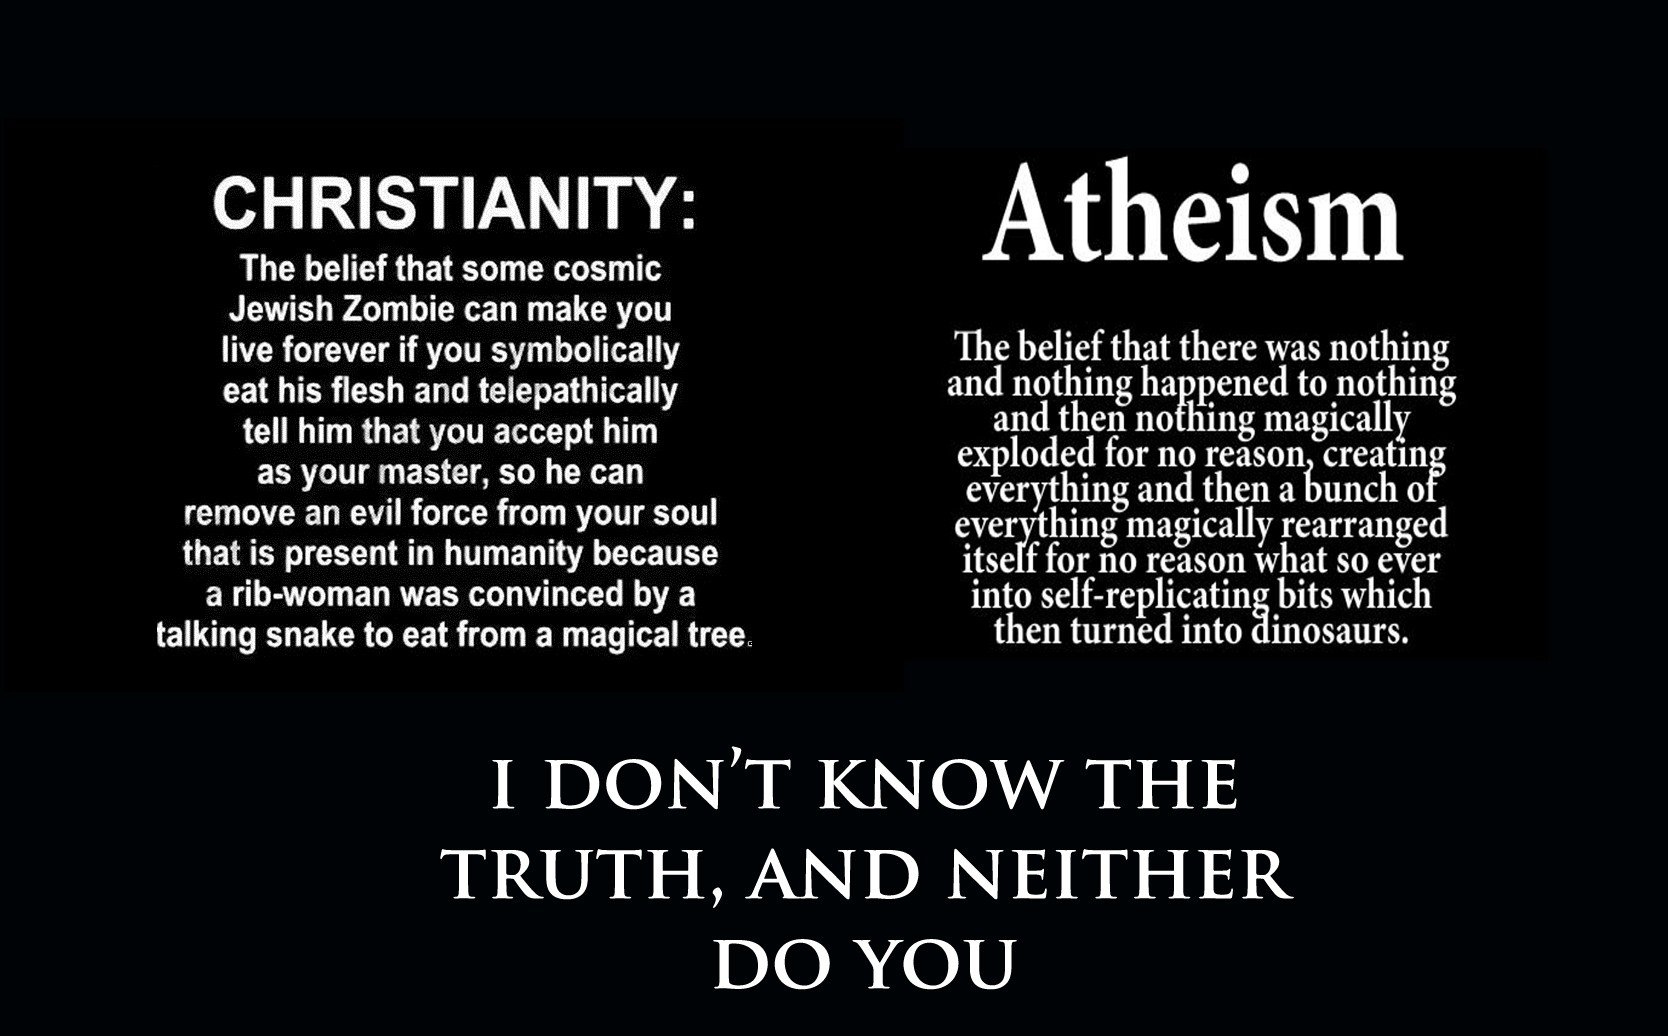 atheism, Christianity Wallpaper